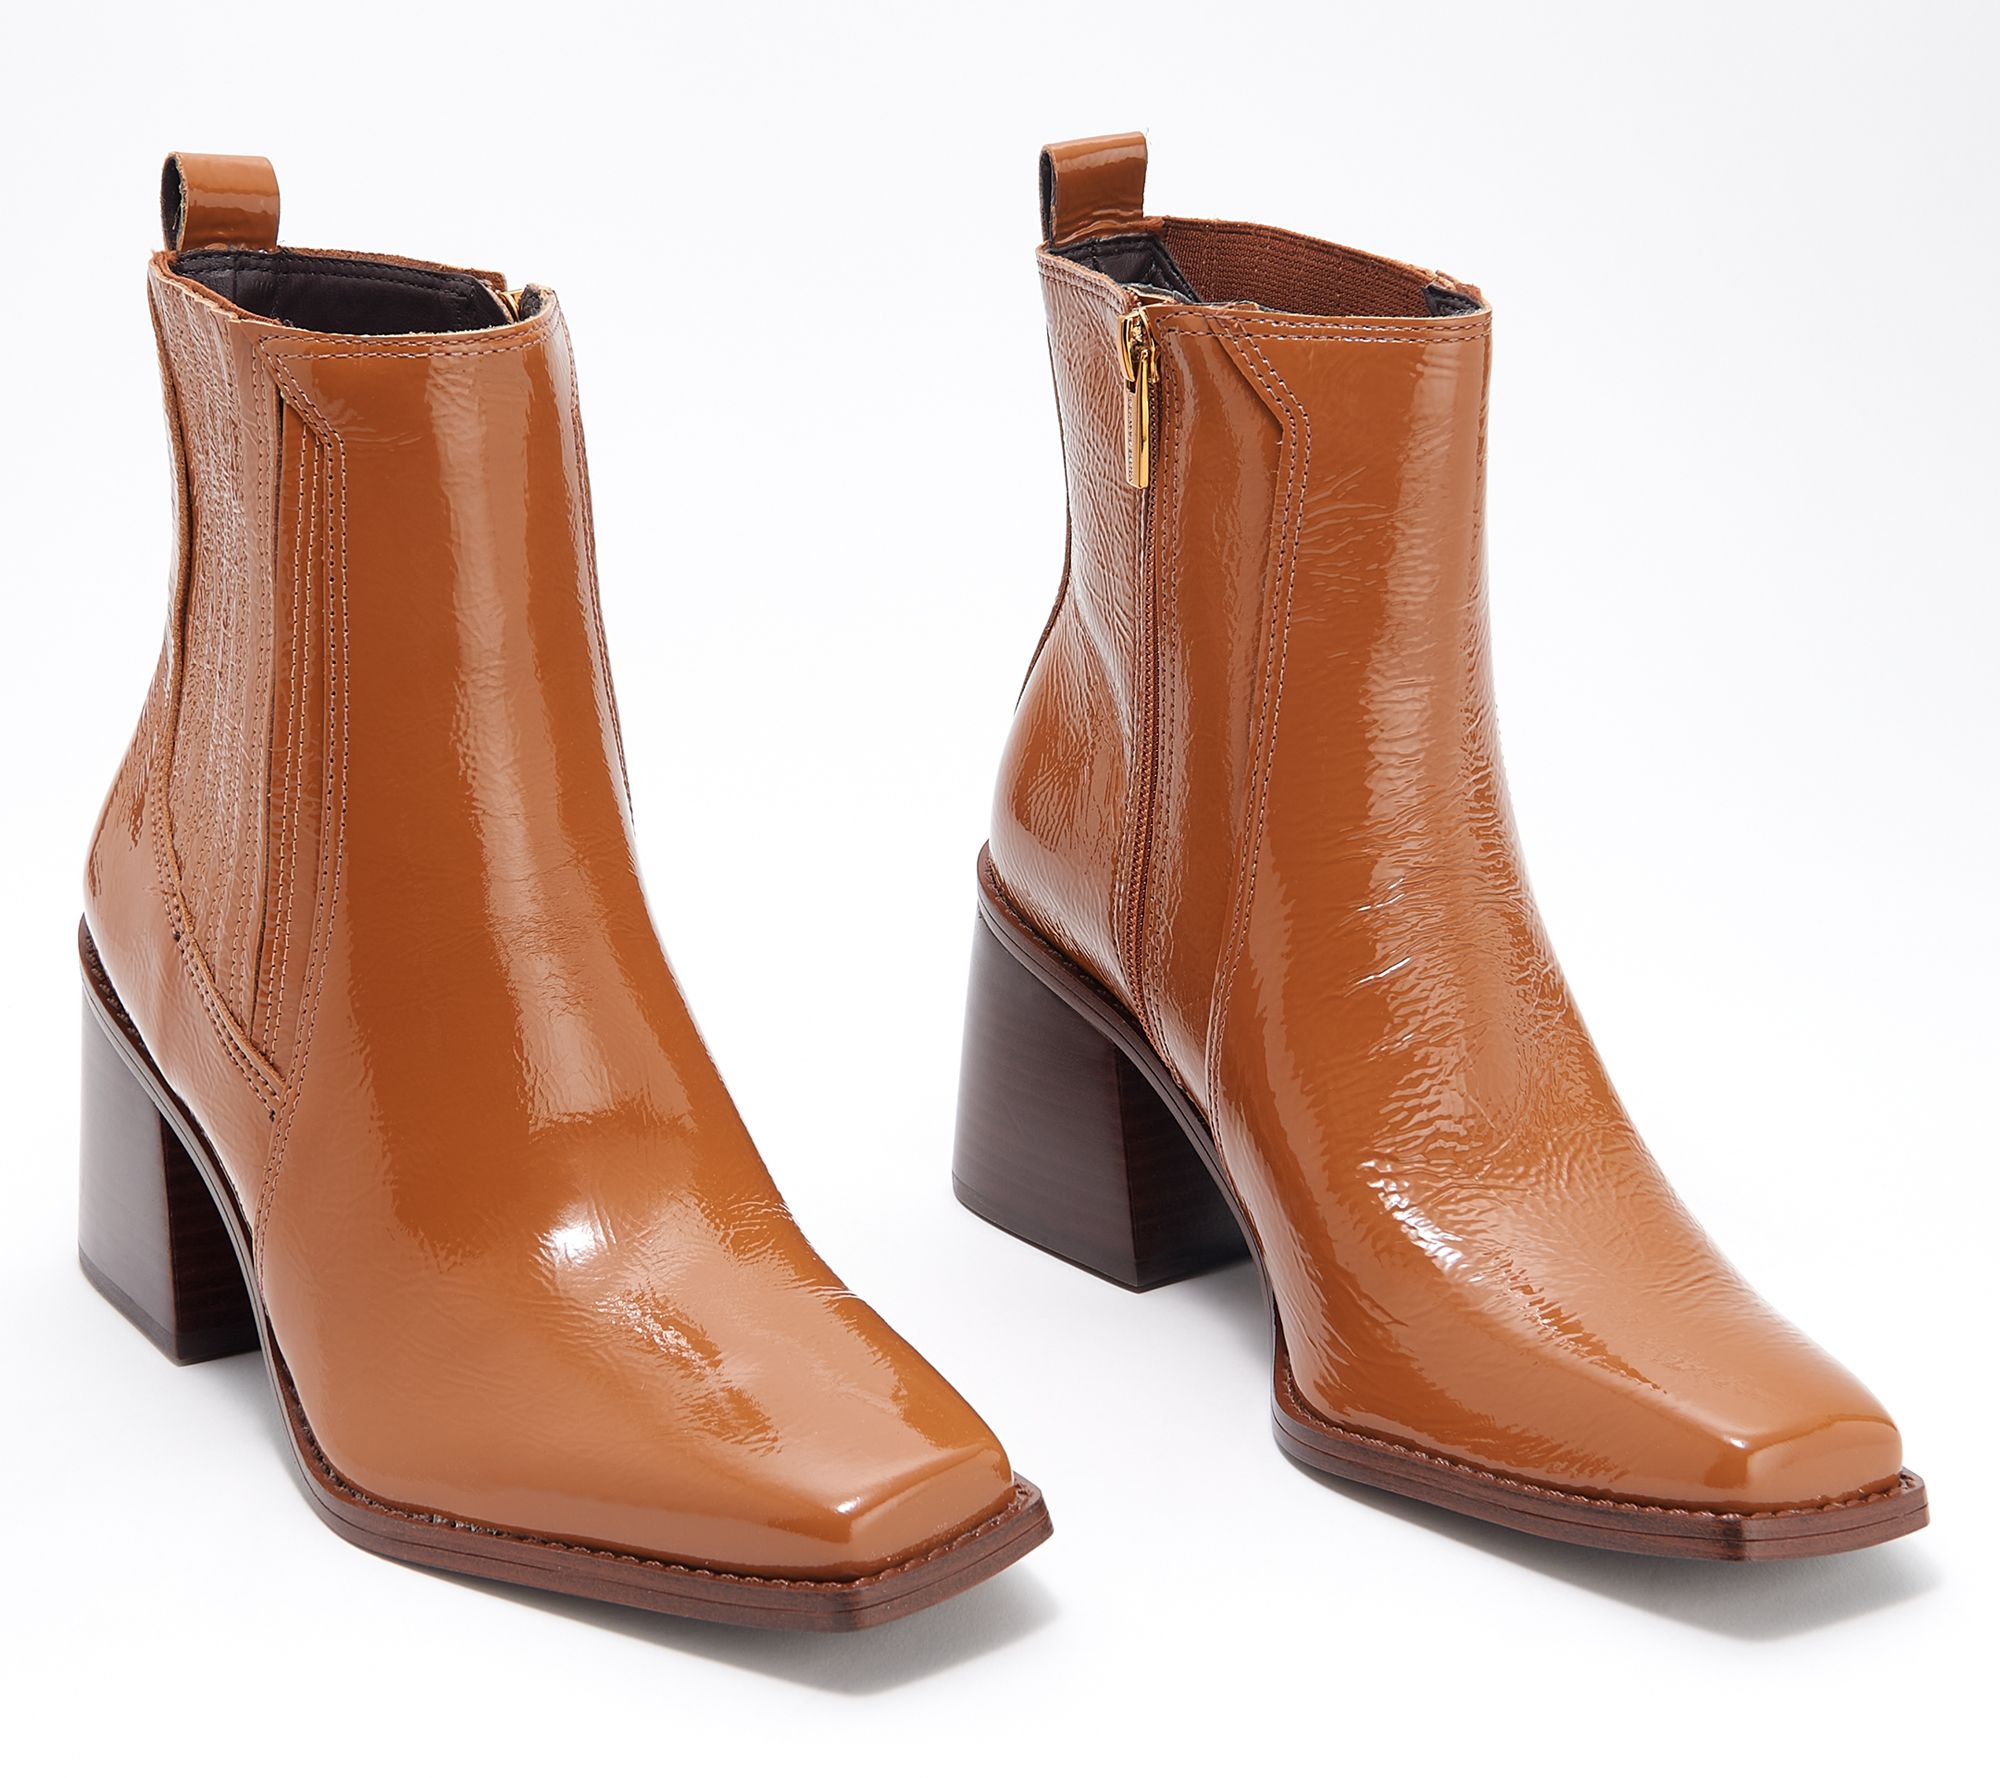 Vince Camuto - Boots 